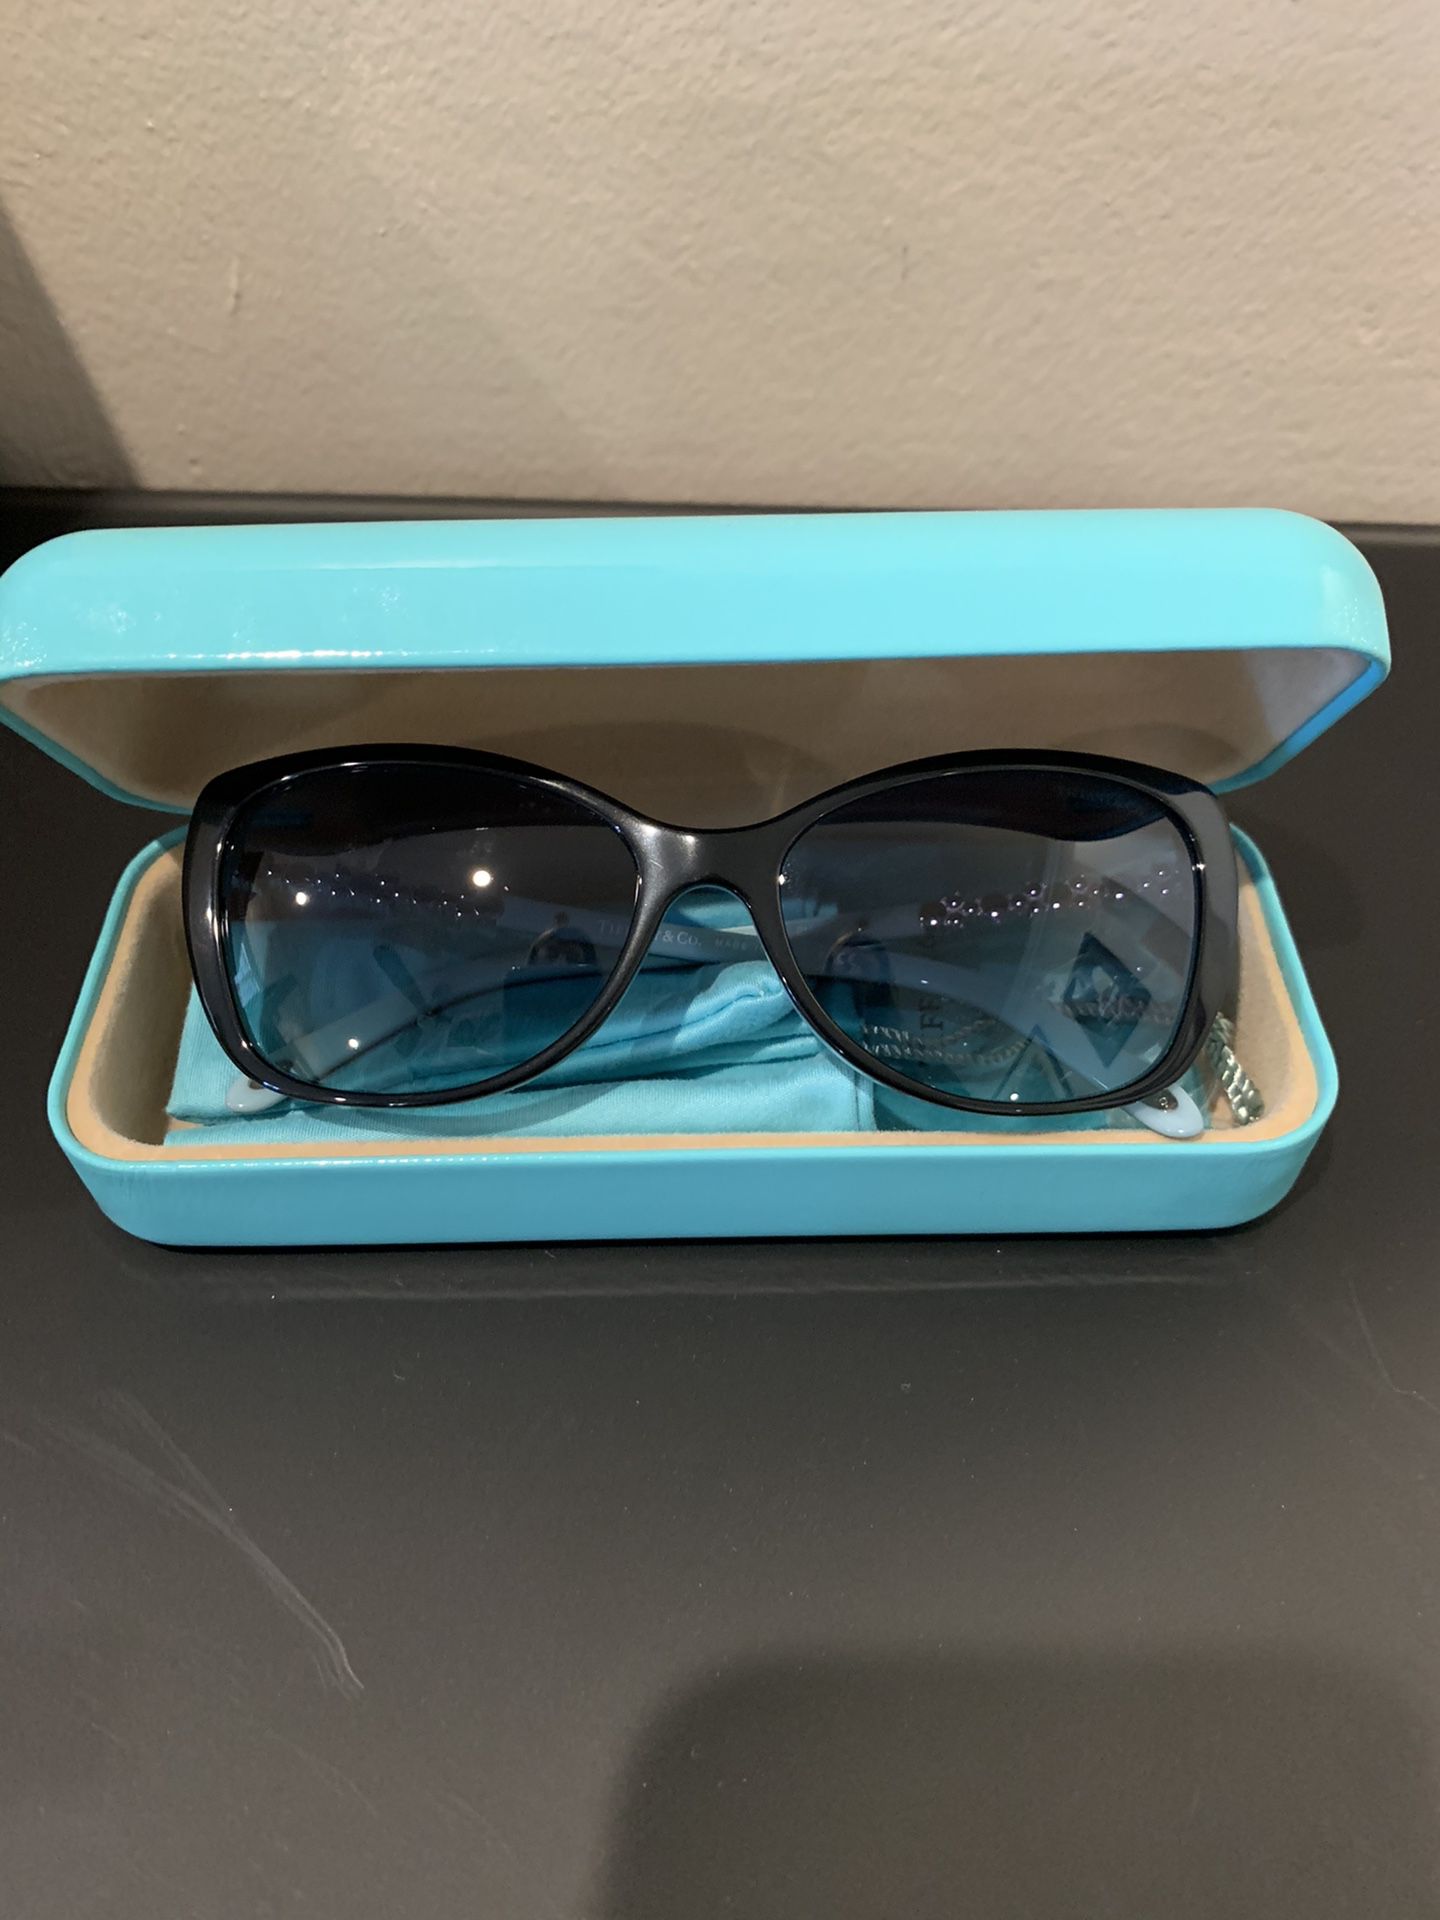 Authentic Tiffany sunglasses model for 105HB